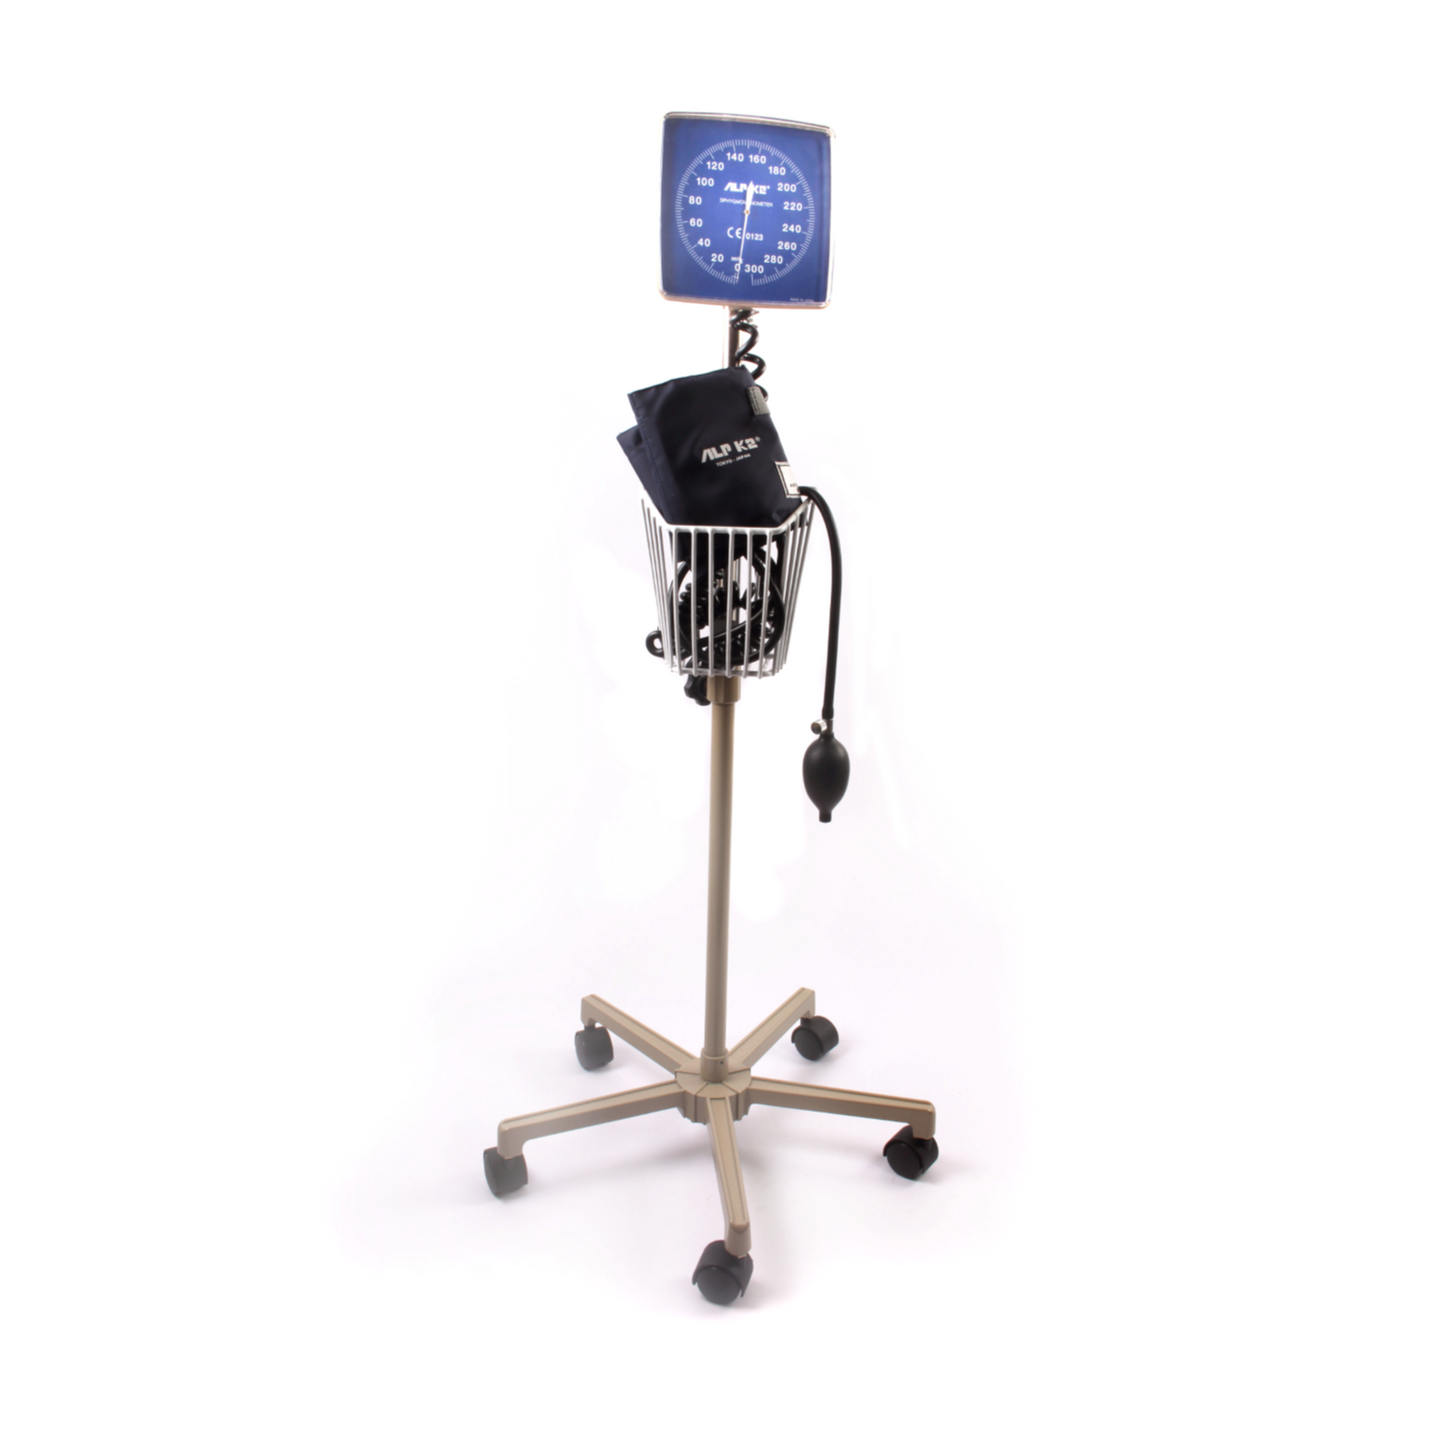 ALP K2 Standby Aneroid Sphygmomanometer - Blood pressure monitoring for medical standby.